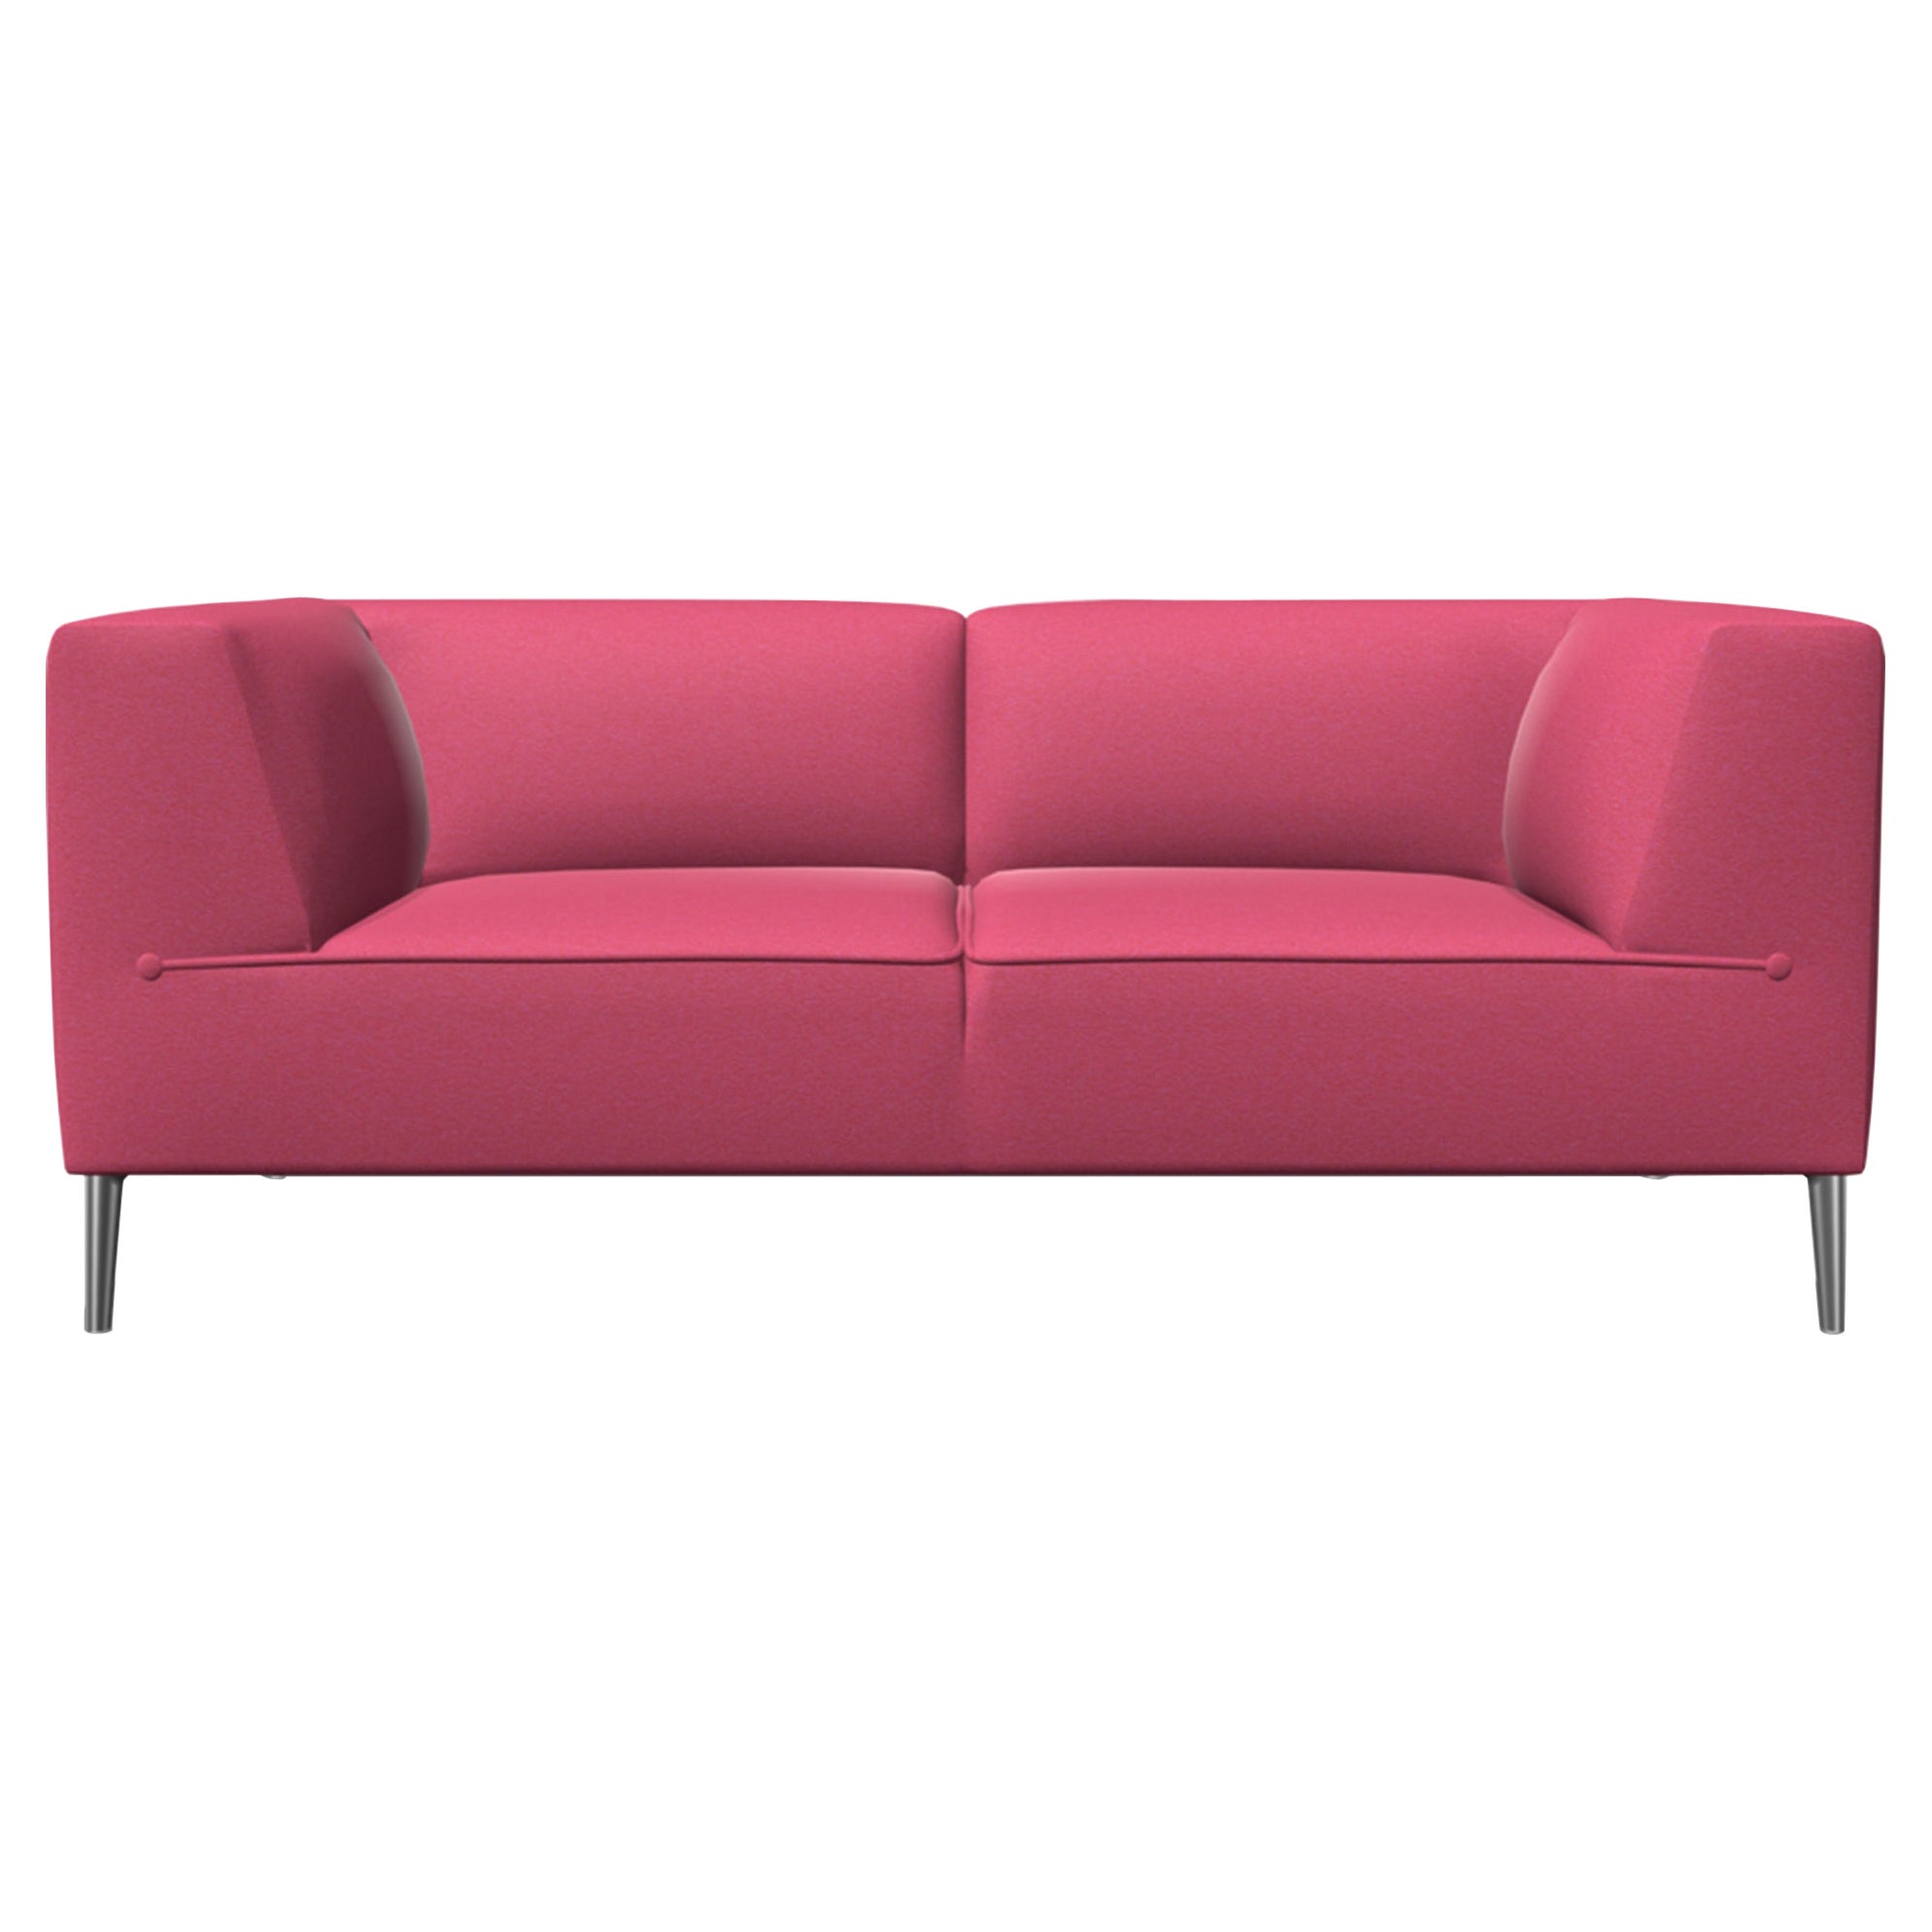 Moooi Double Seat Sofa So Good in Pink Upholstery with Polished Aluminum Feet